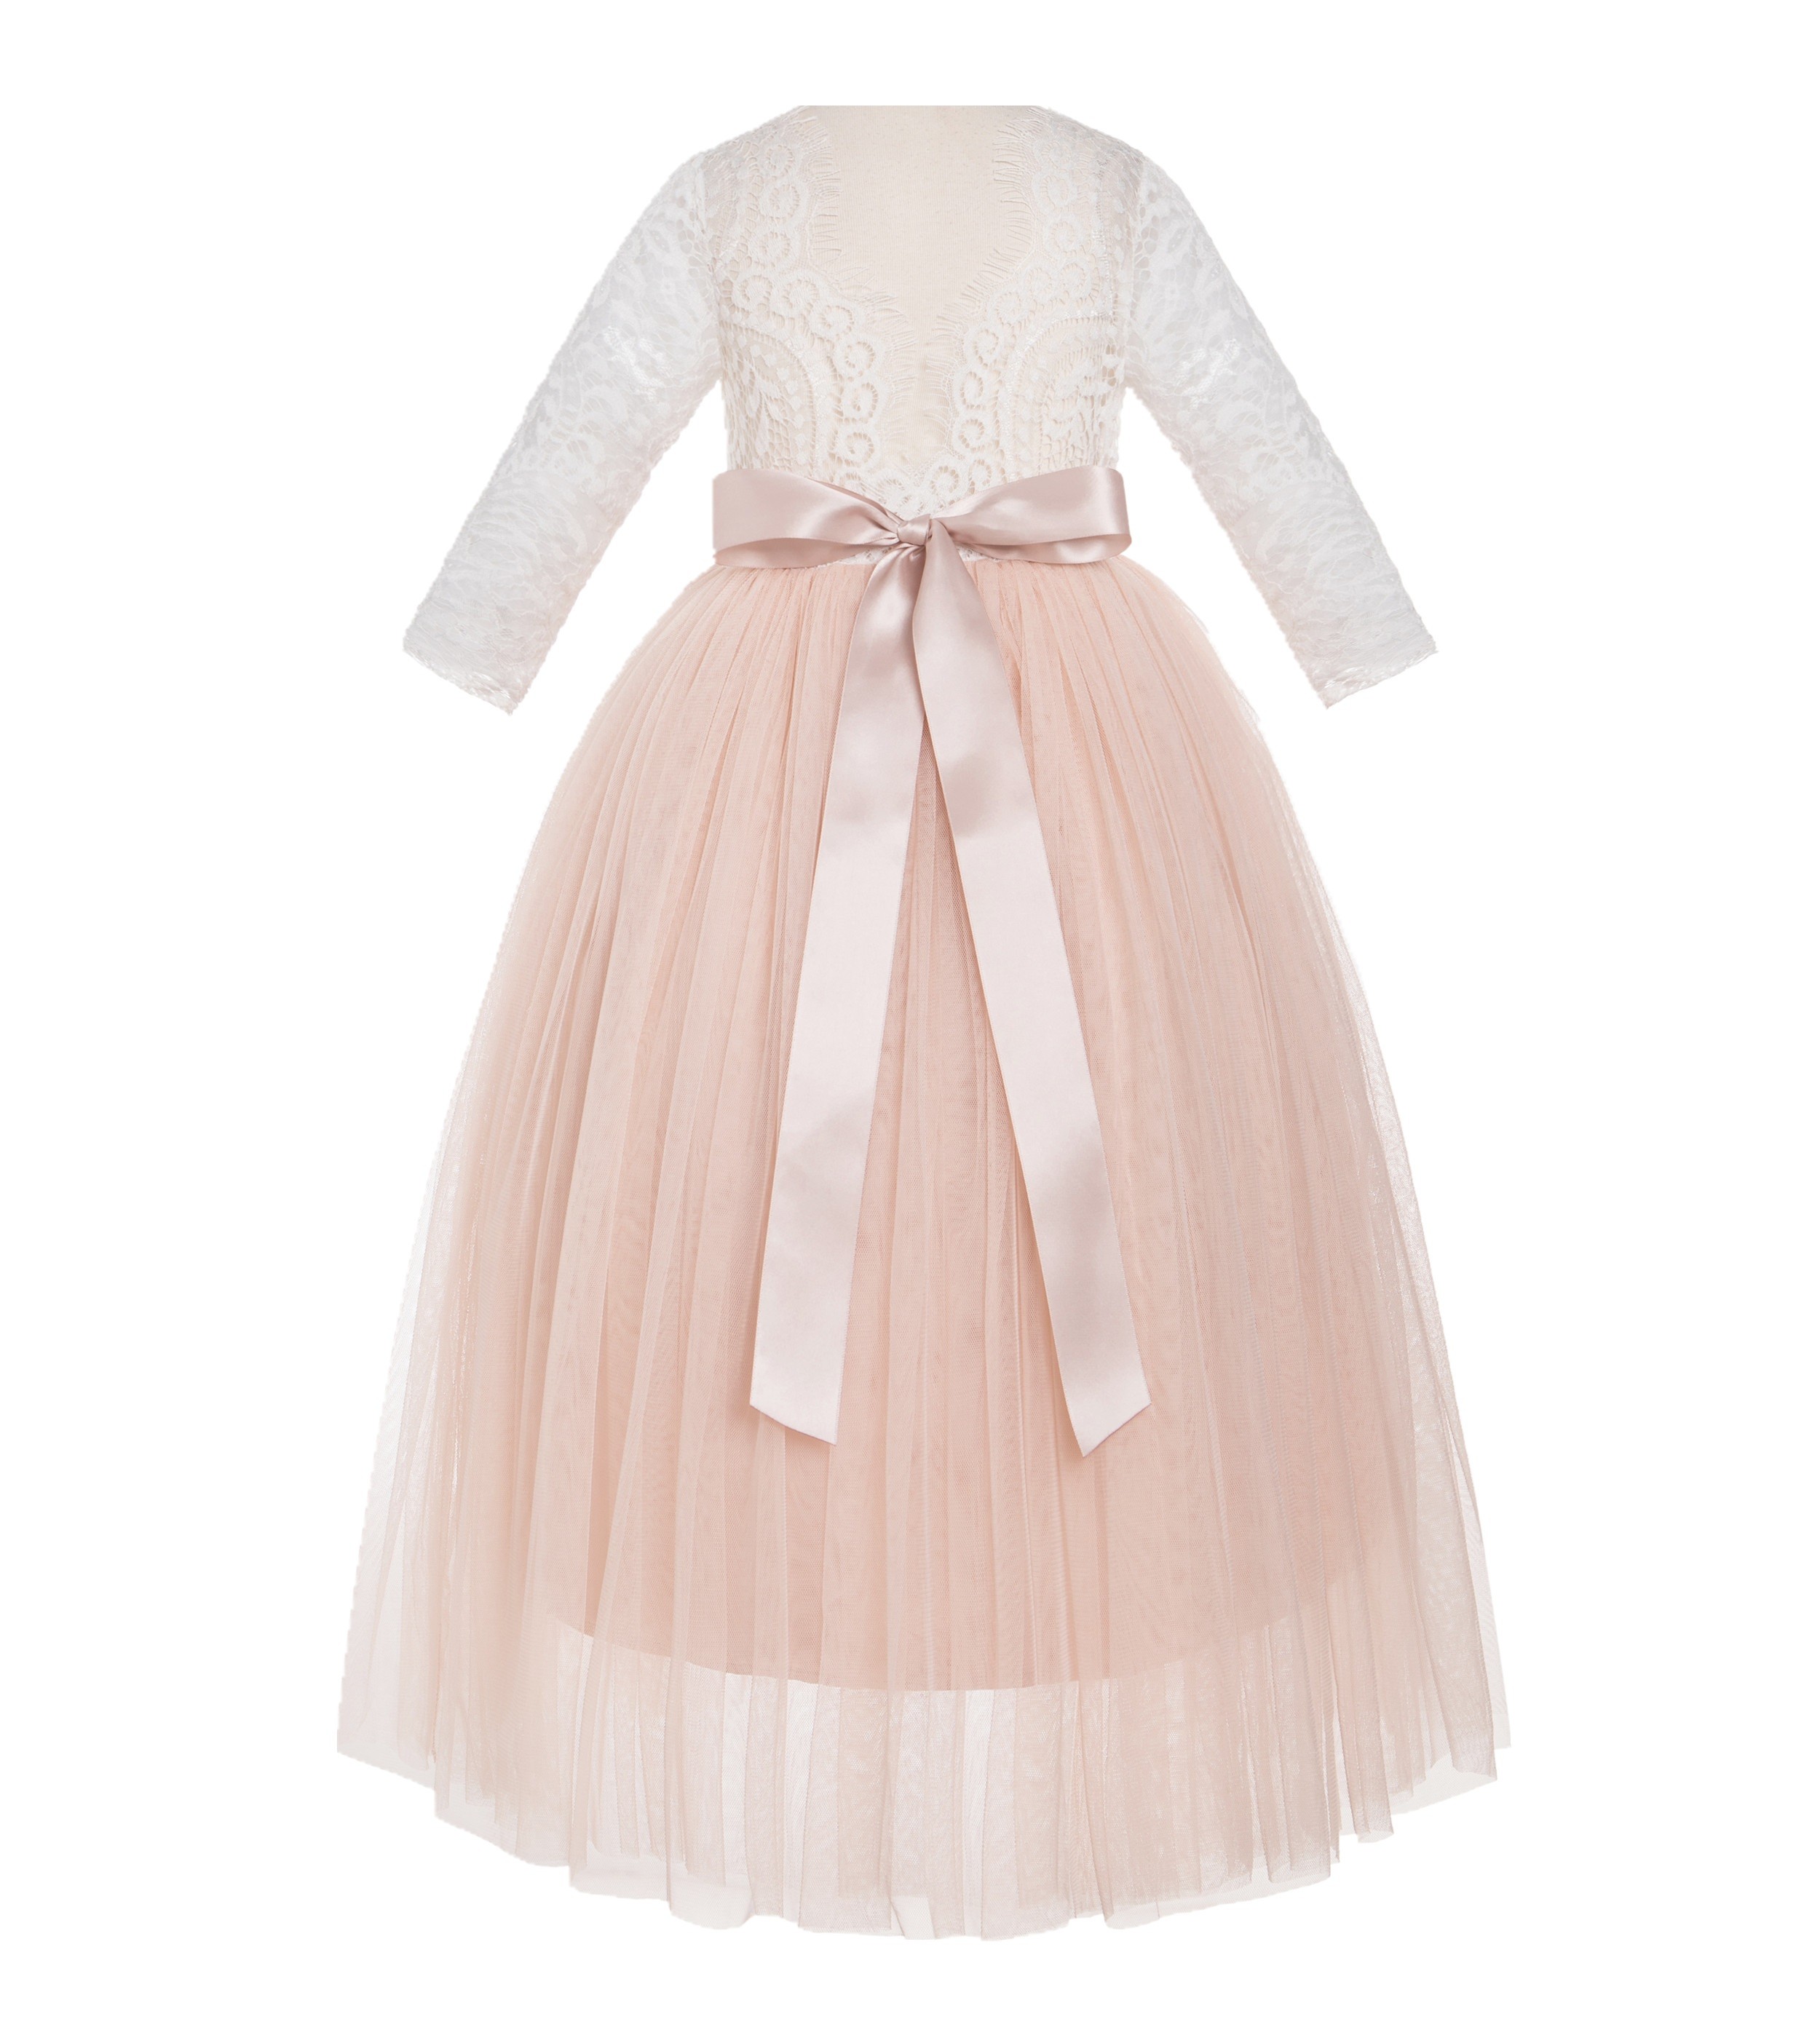 Blush Pink A-Line V-Back Lace Flower Girl Dress with Sleeves 290R